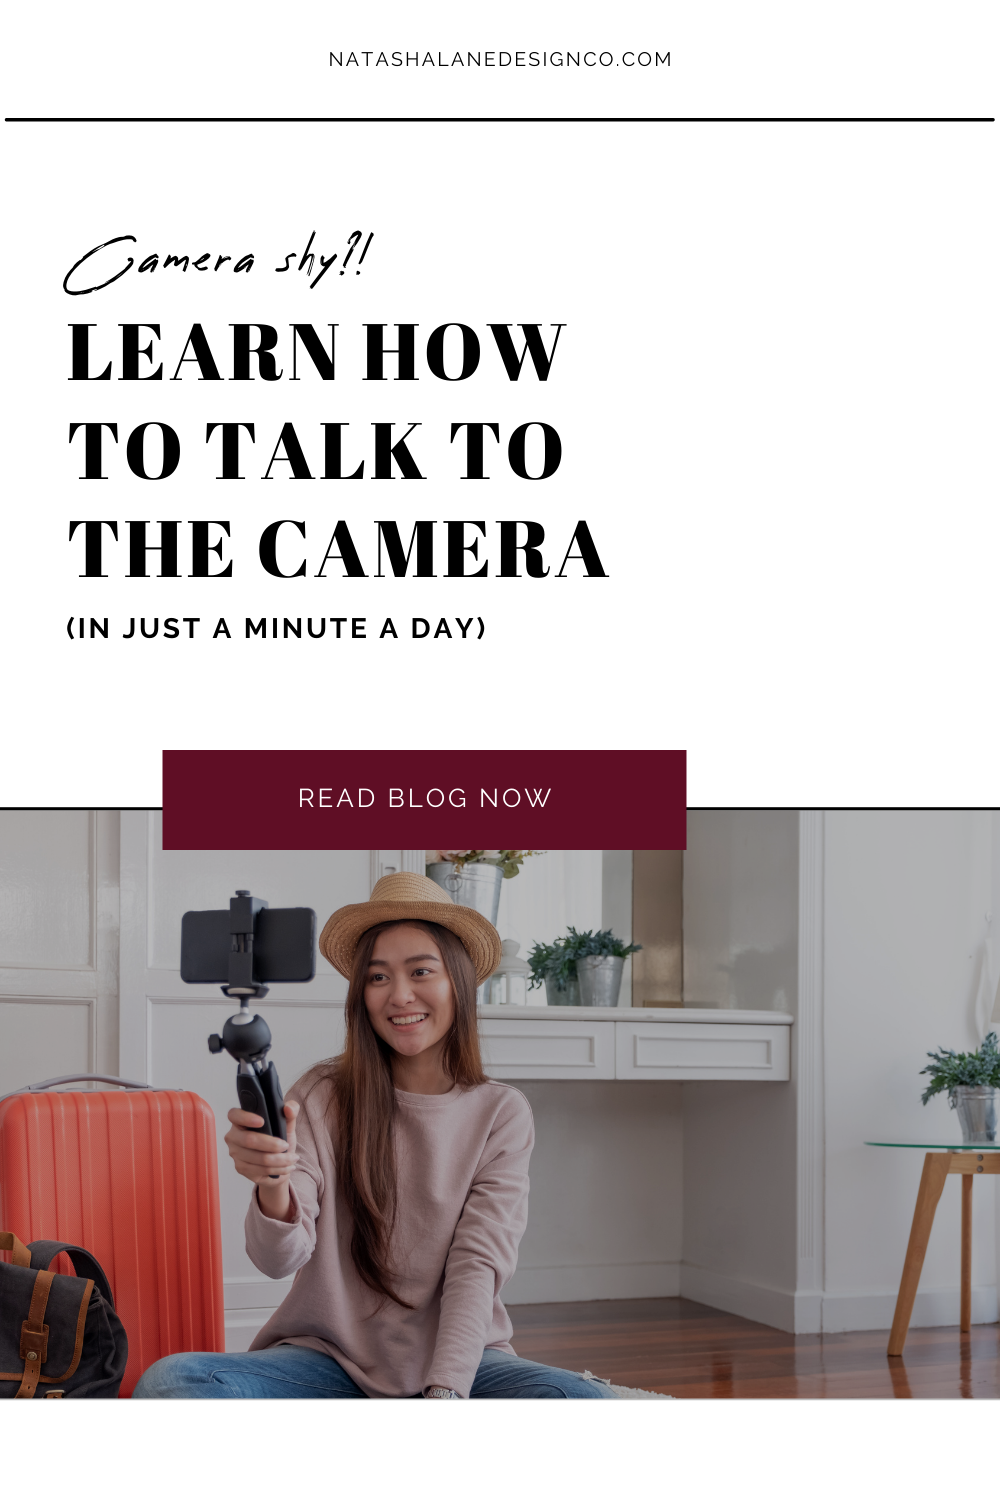 Camera shy_! Learn how to talk to the camera (in just a minute a day) (4)